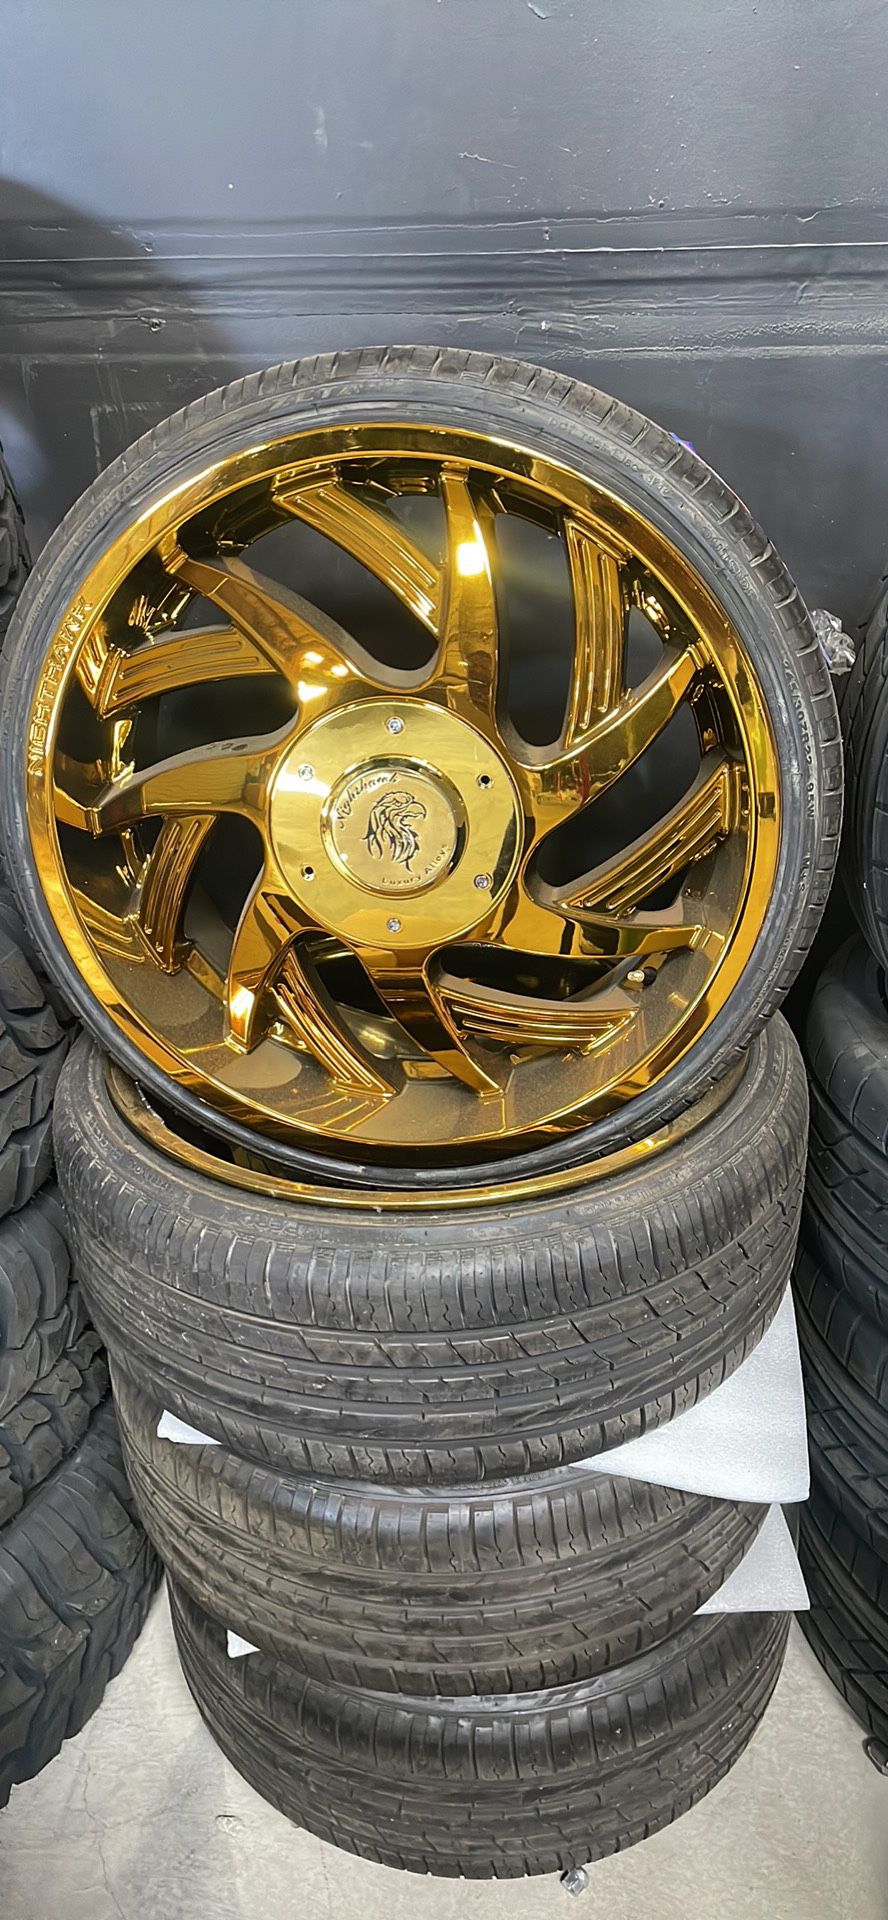 22” Gold Forged Wheels Rims 5x115 5x4.5 5x114.3 & Tires Charger Challenger 300c Impala-We Finance